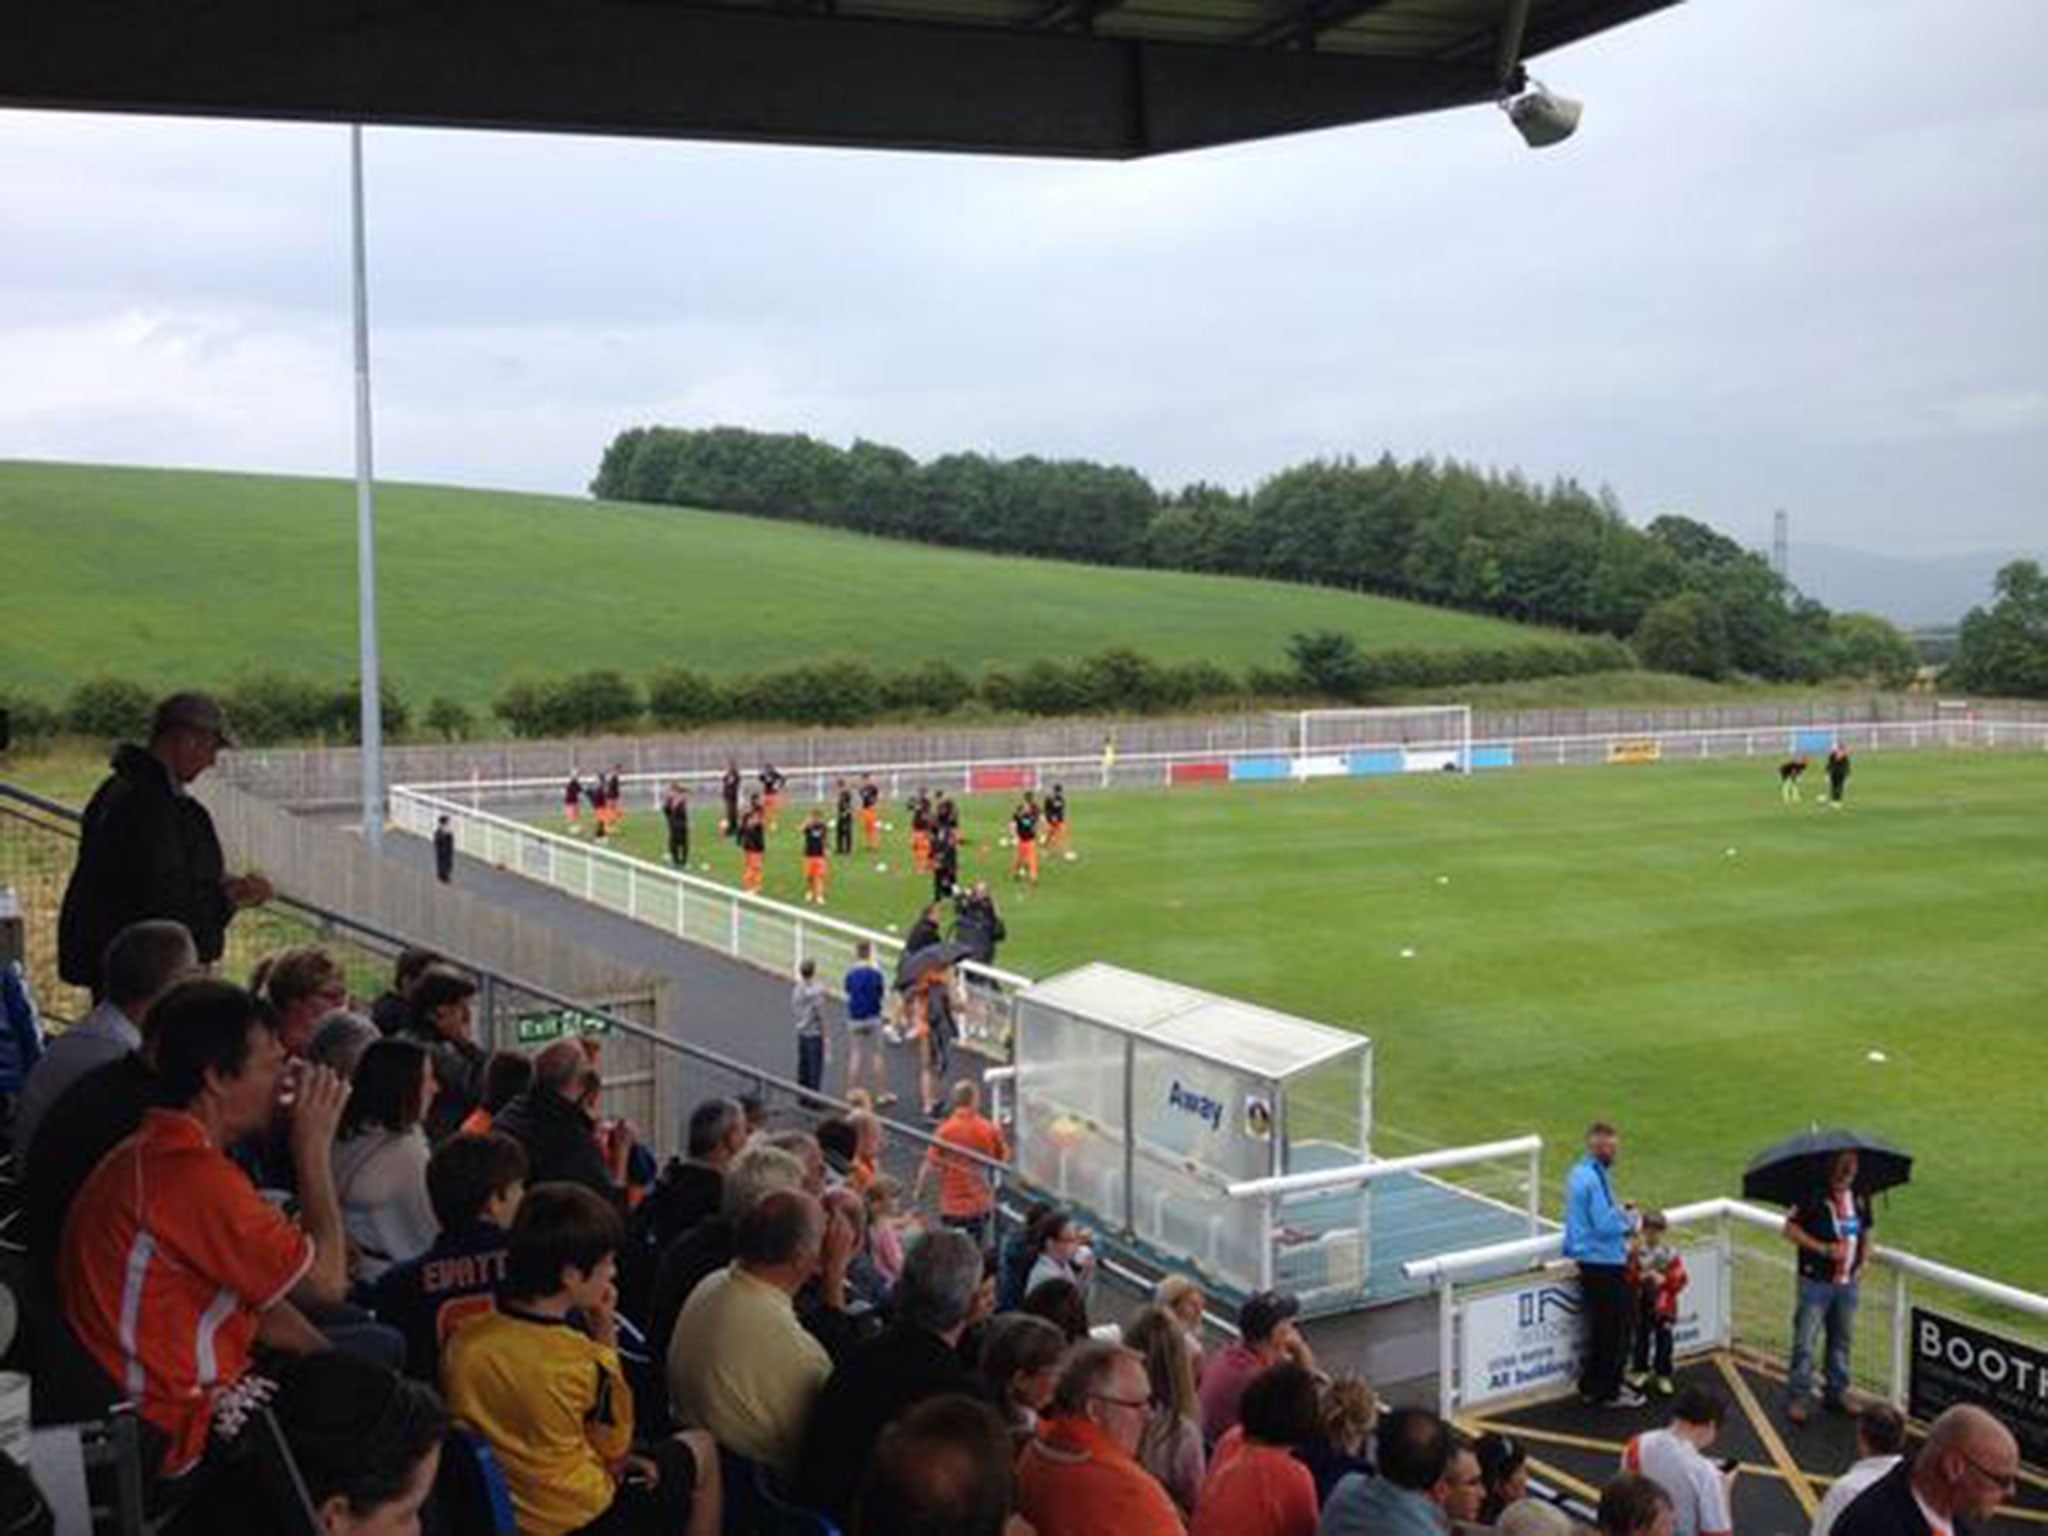 Blackpool players warm-up ahead of their pre-season match against Penrith